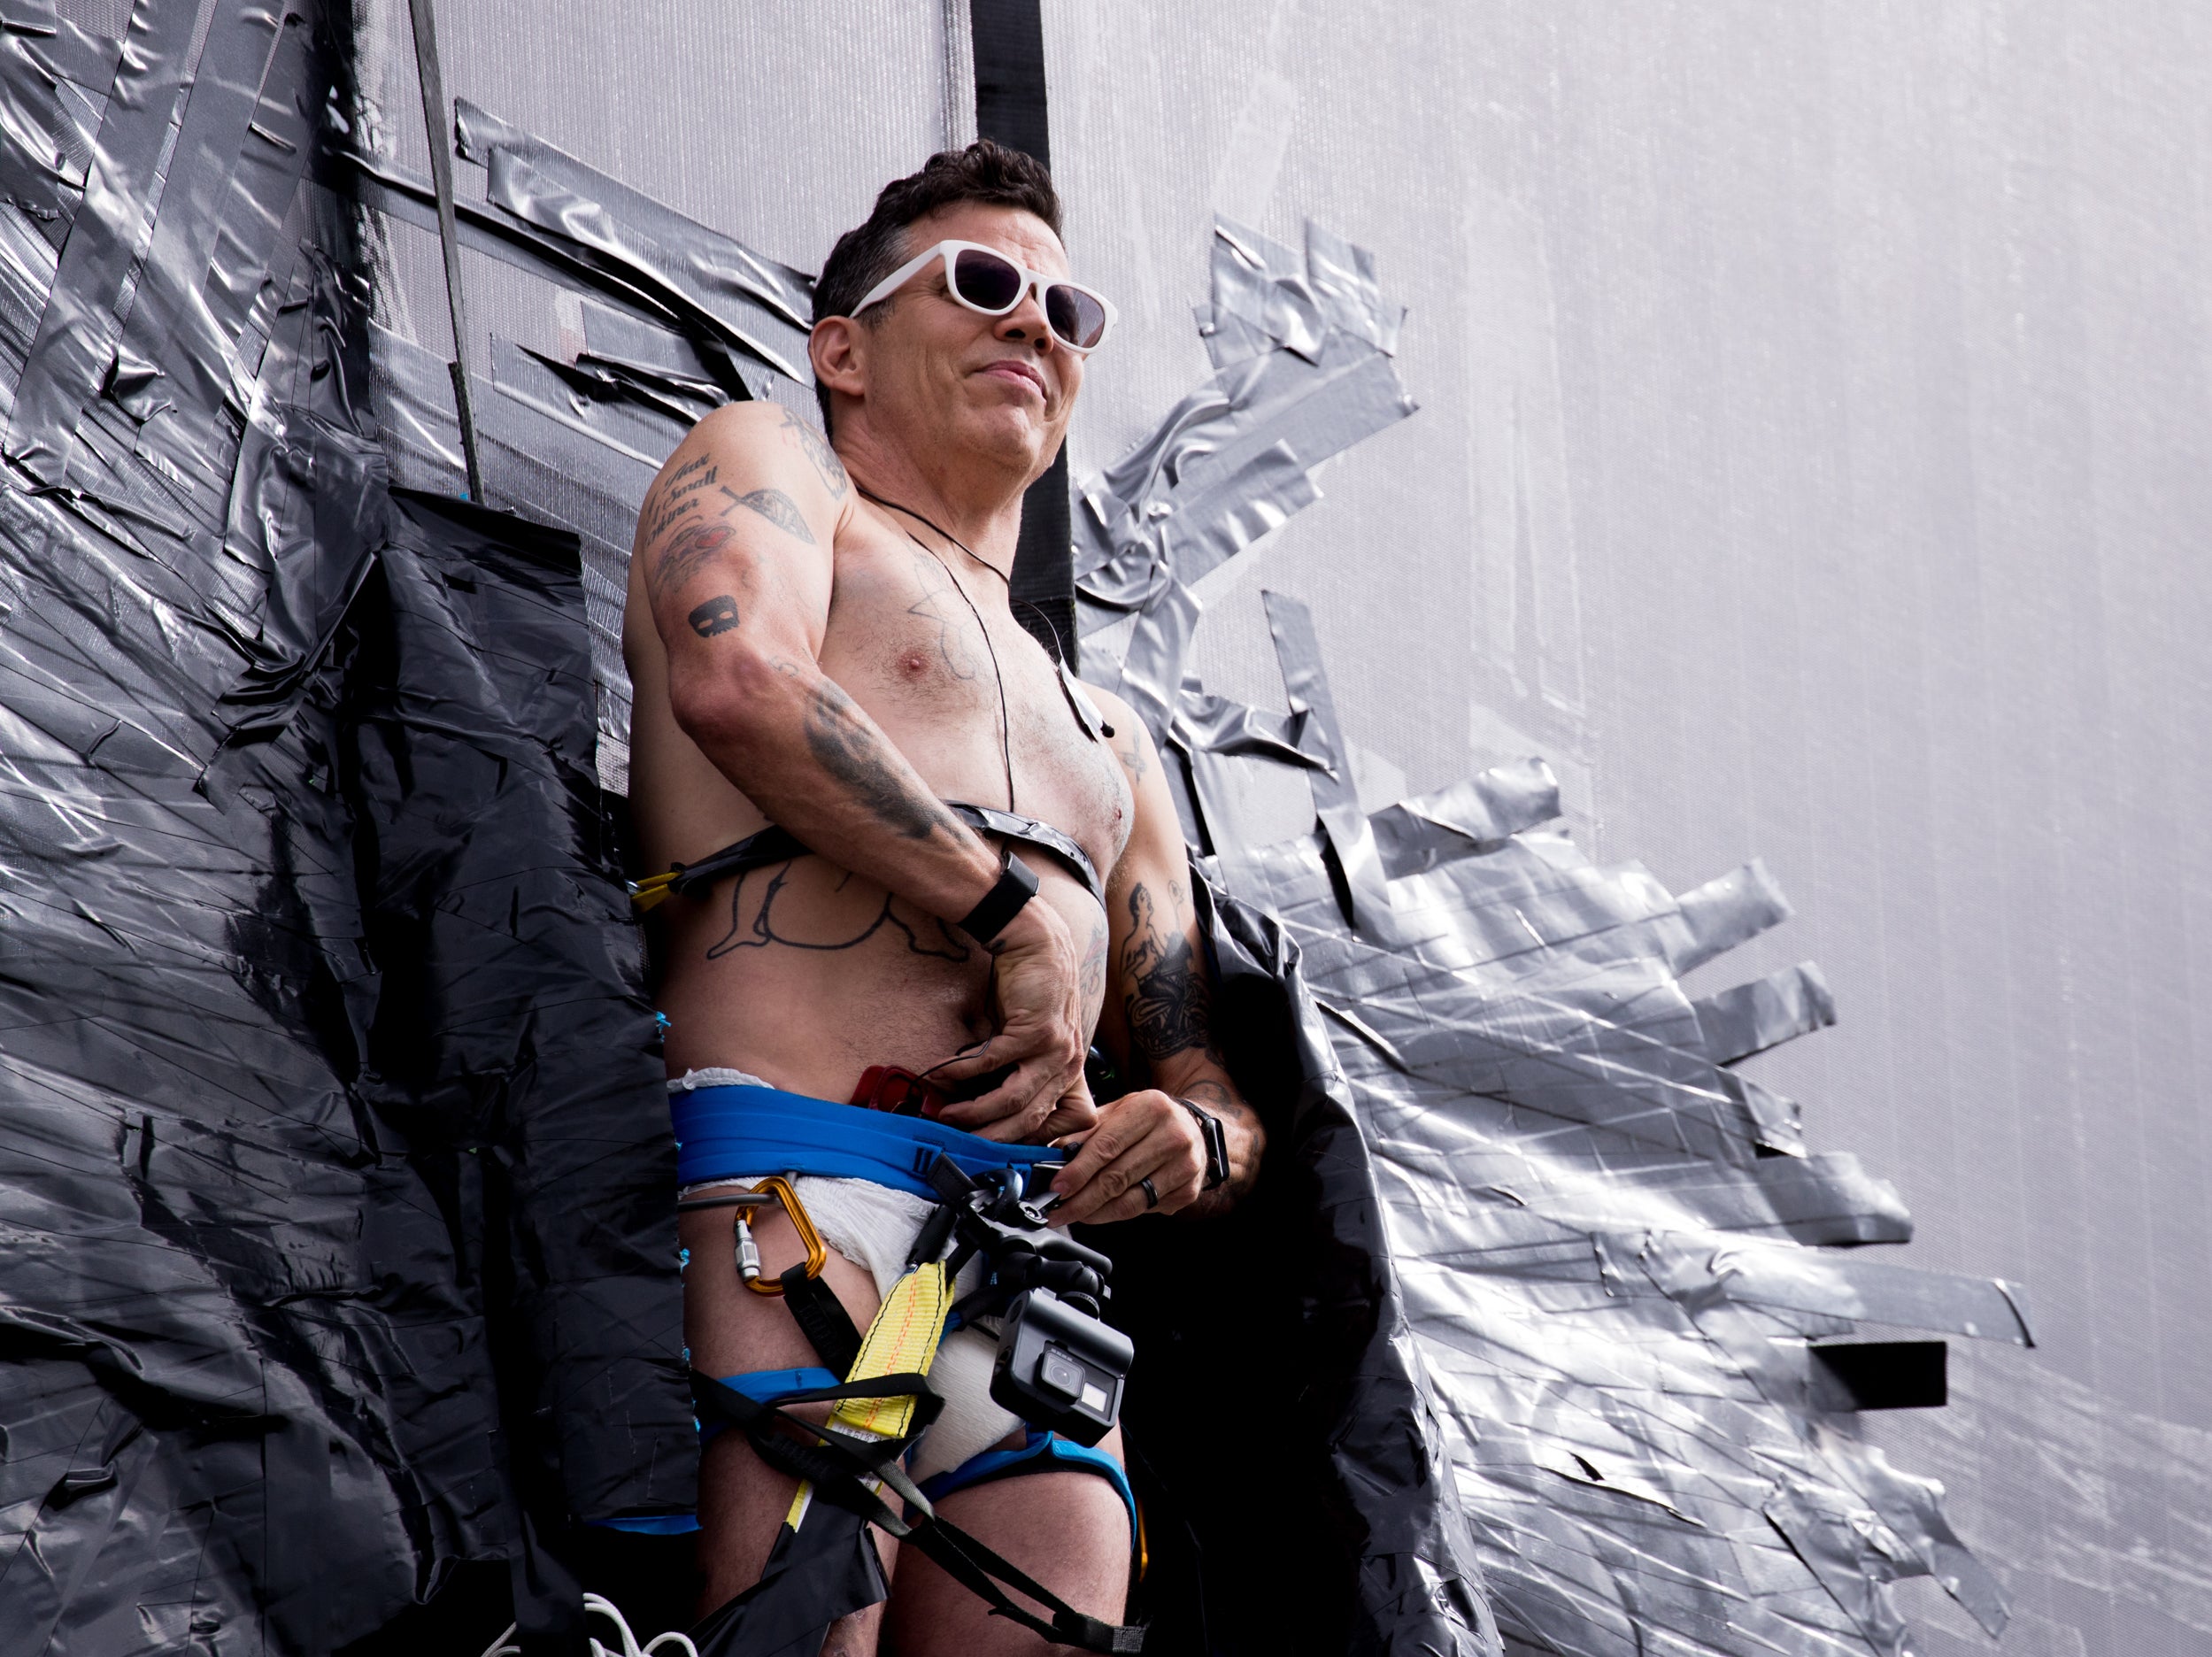 Steve-O pictured duct-taping himself to a billboard in 2020 as a promotional stunt